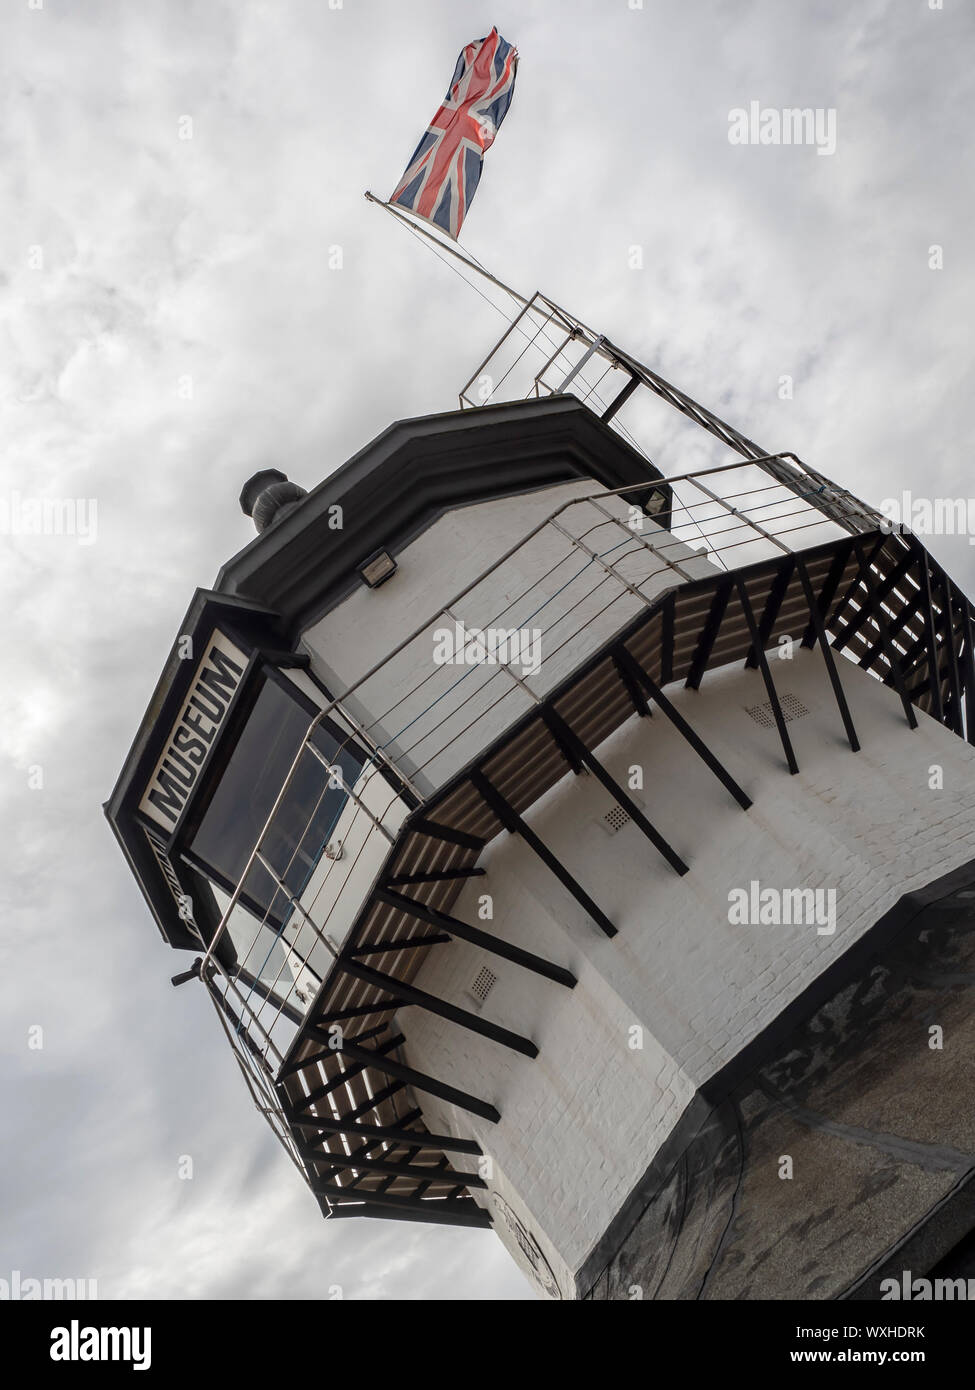 HARWICH, ESSEX, UK - AUGUST 12, 2018:  Exterior view of the Low Light House  on the seafront Stock Photo